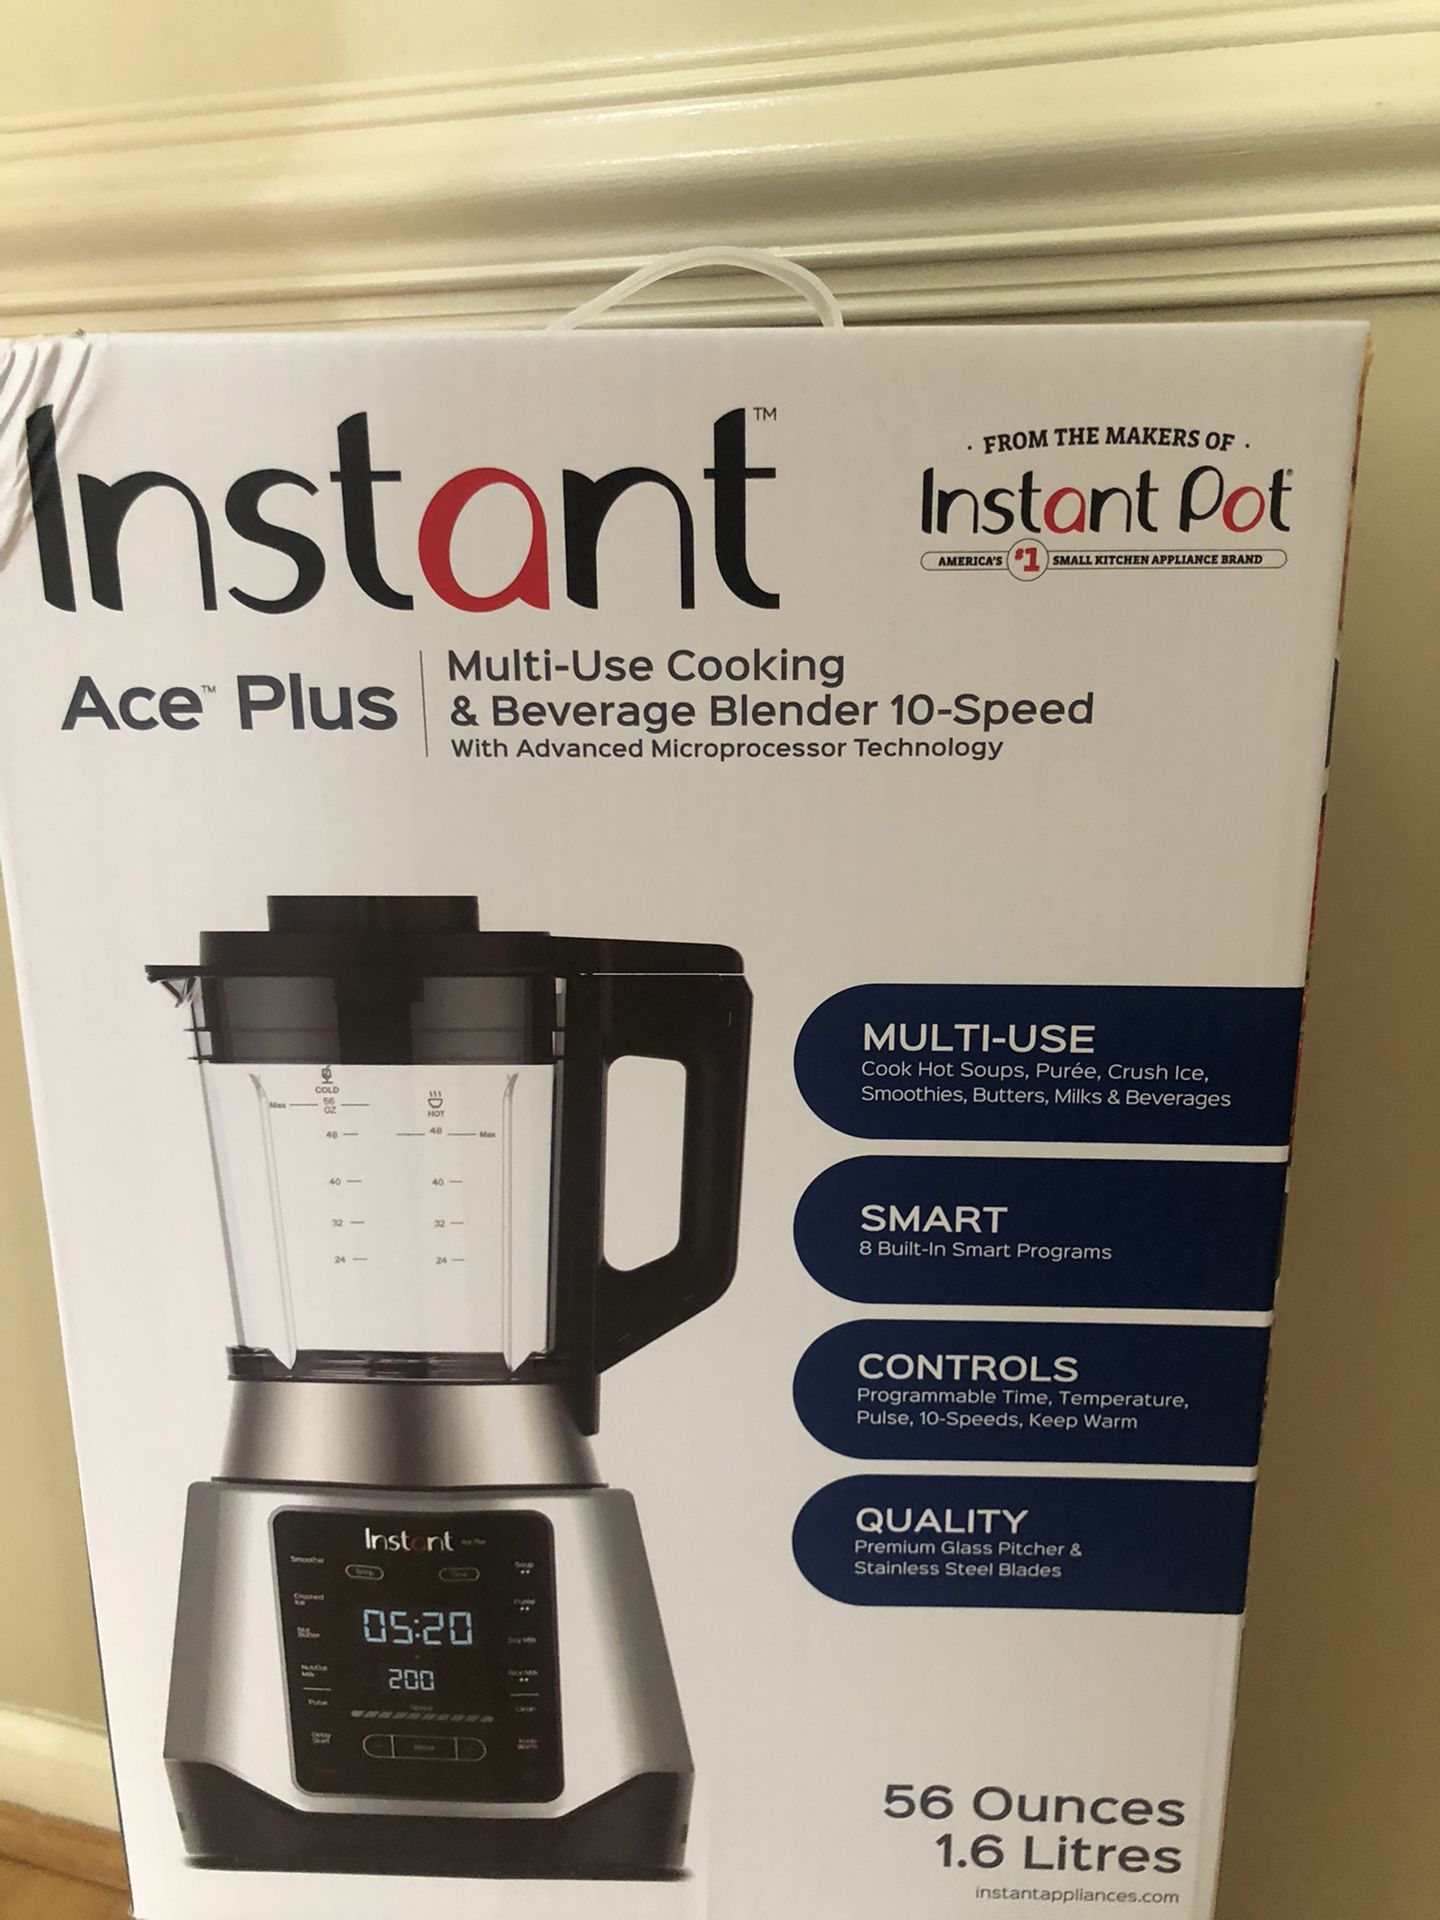 NEW IN BOX instant Pot Ace Plus 10-in-1 Smoothie and Soup Blender, 10 One Touch Programs  Retails $149 on Amazon  Selling for $100